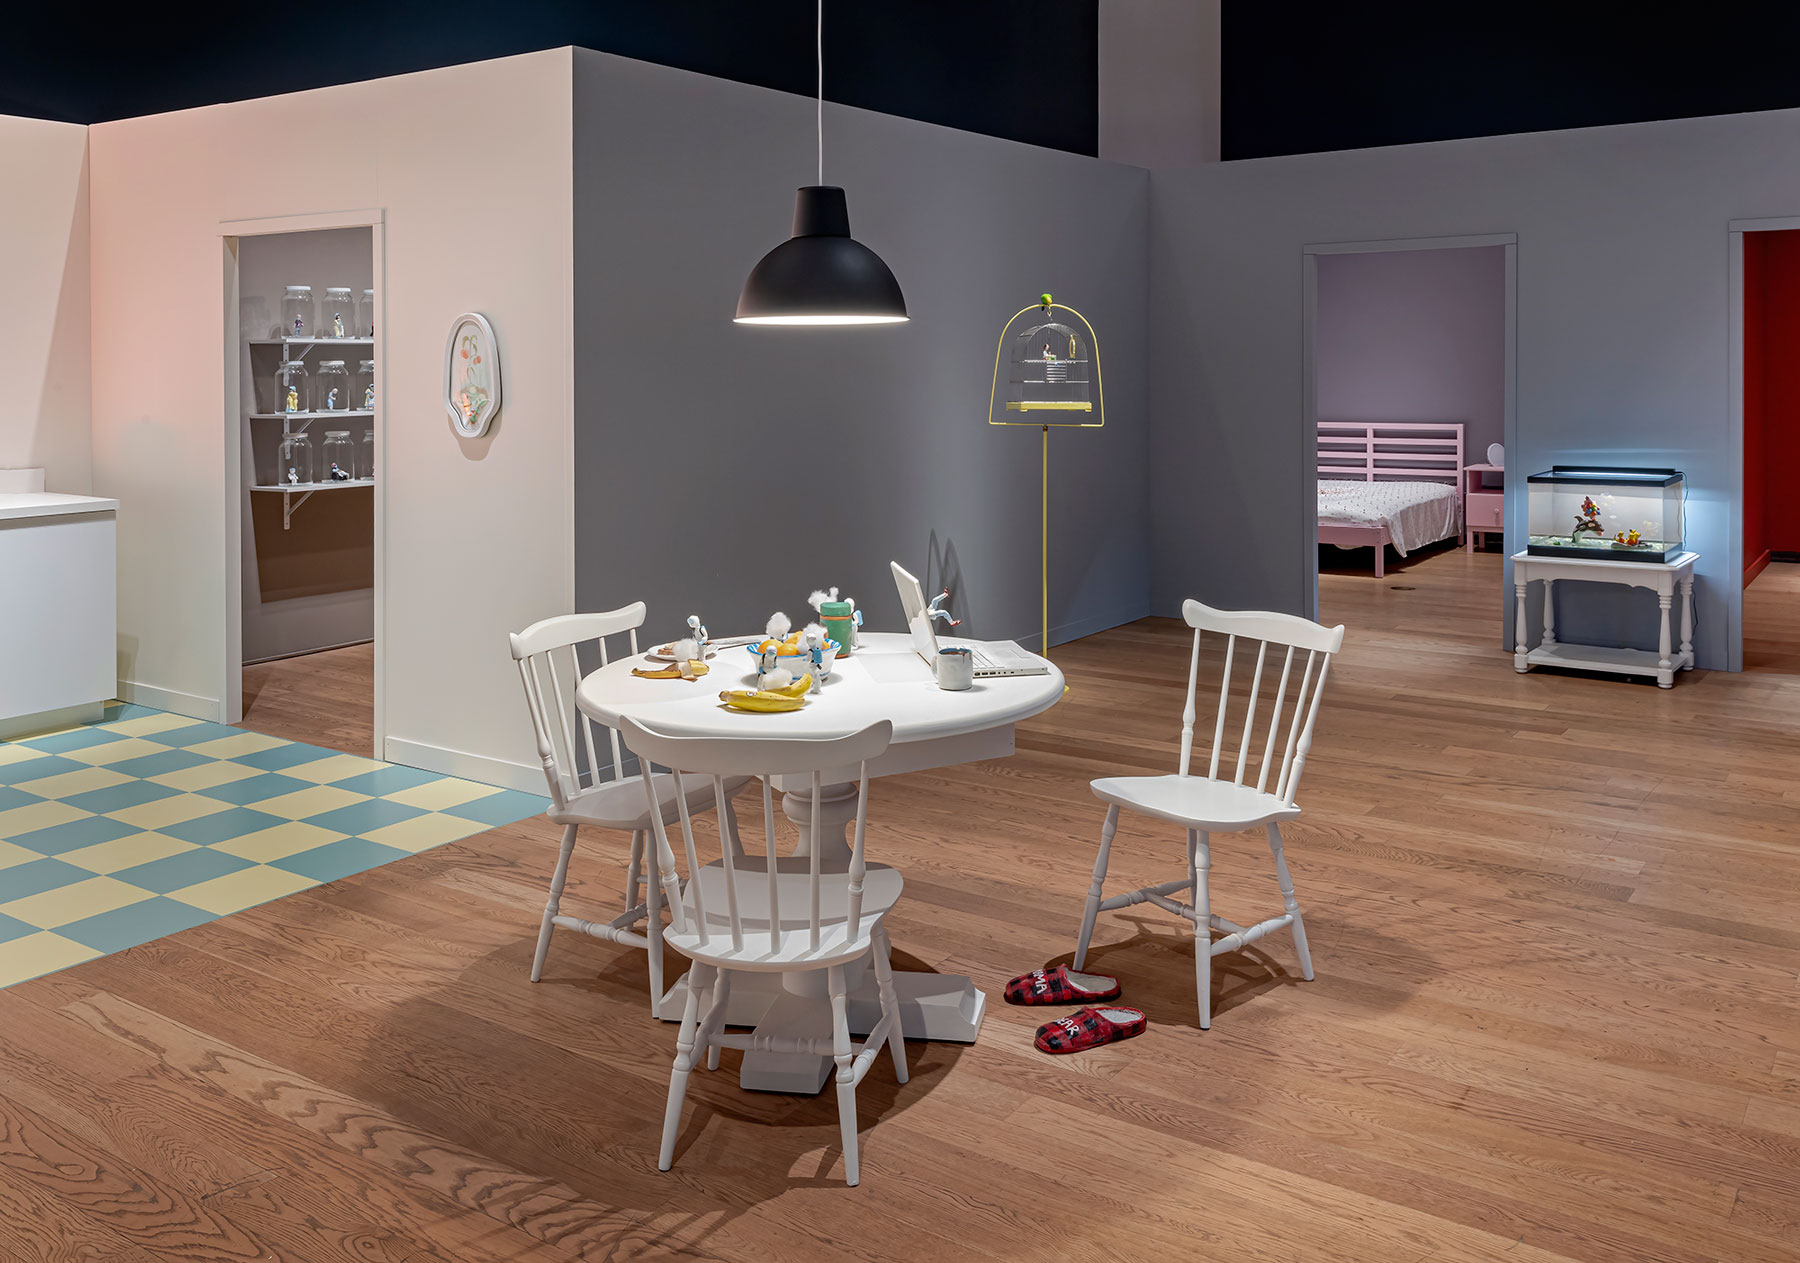 Installation view of Housewarming with a kitchen table and chairs visible inside a set of open doors